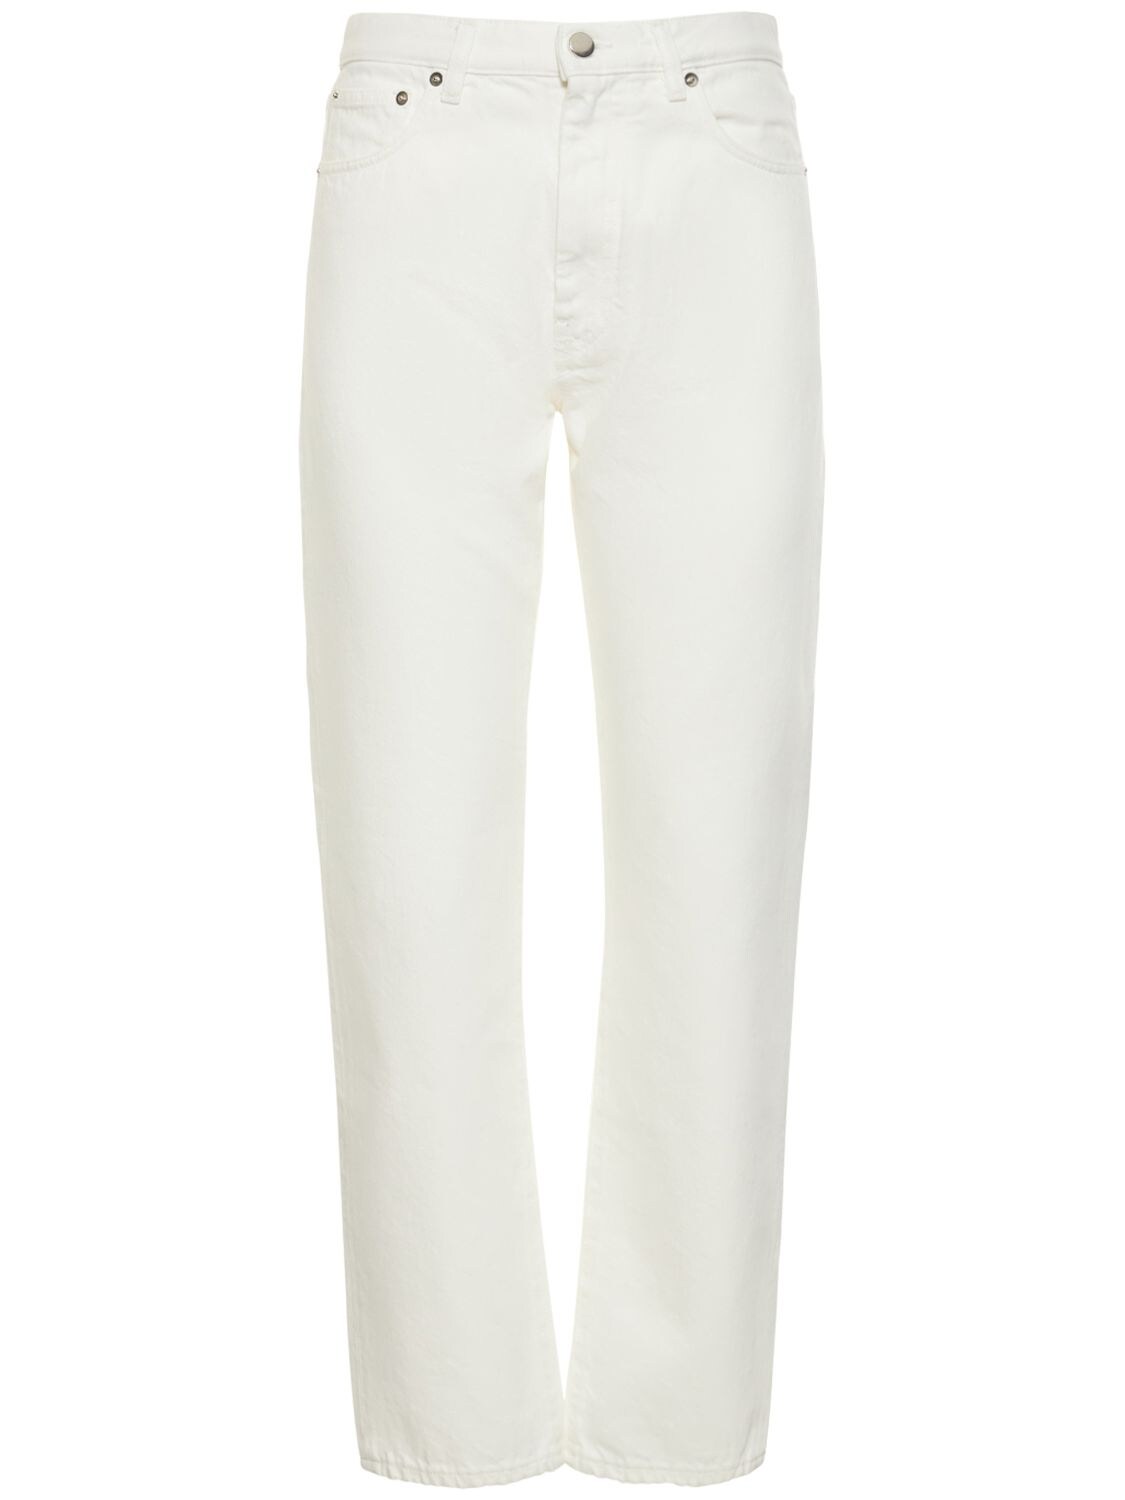 Shop Loulou Studio Wular Straight Organic Cotton Jeans In Ivory